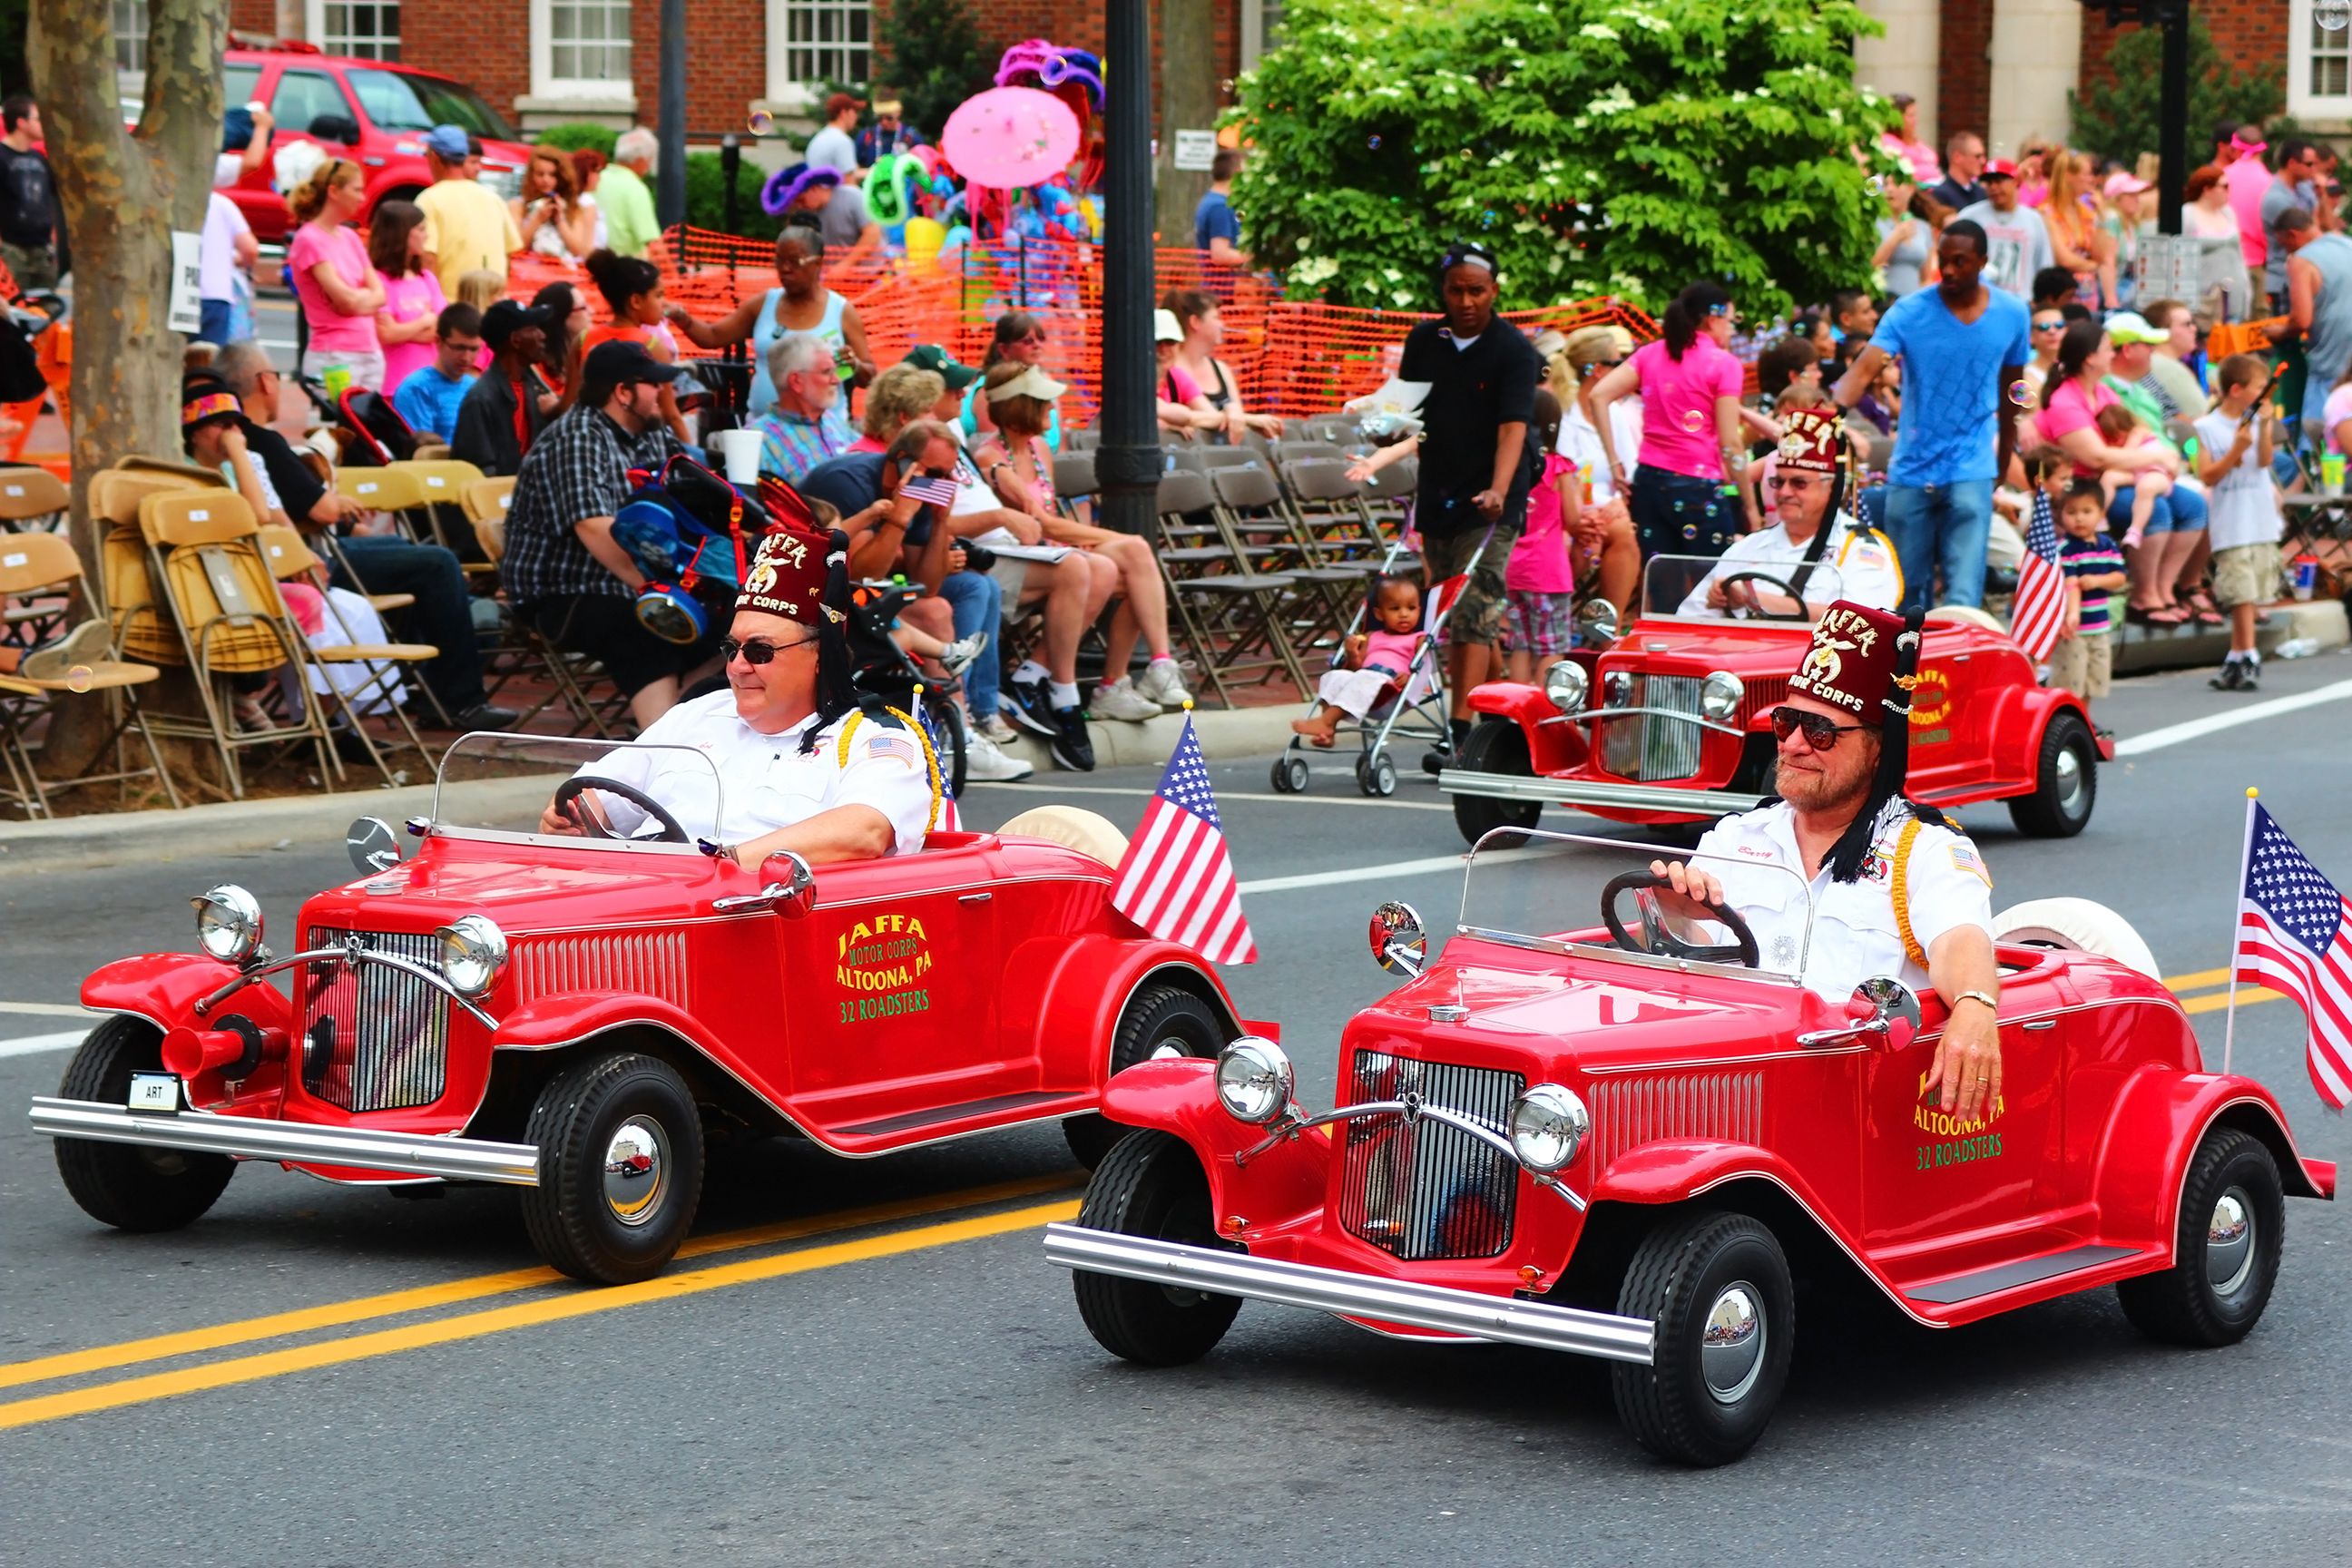 Best Flower Festivals in the U.S., Parades